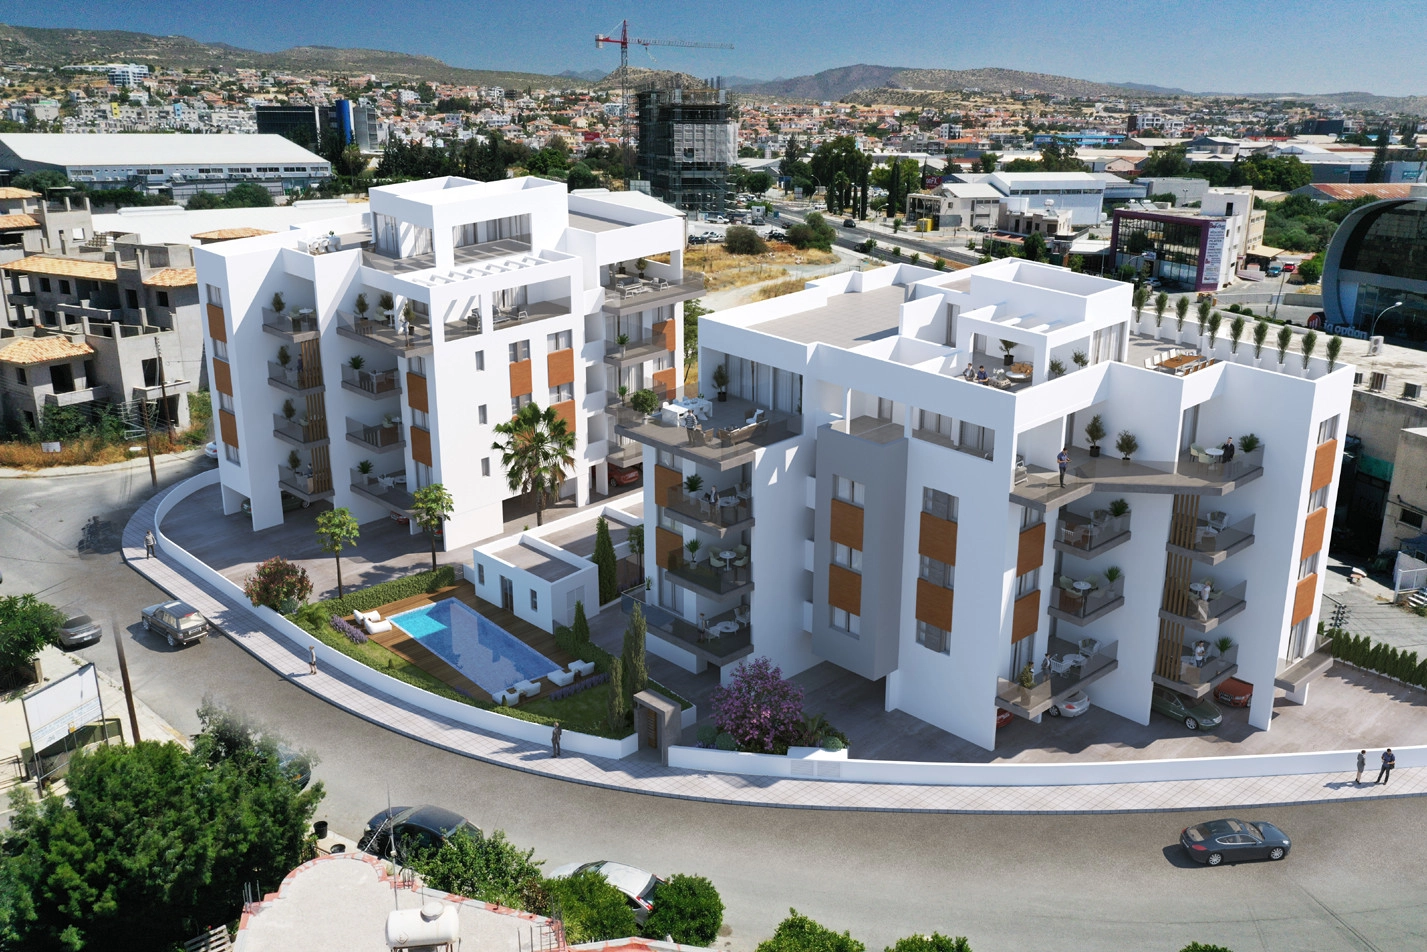 2 Bedroom Apartment for Sale in Limassol – Linopetra